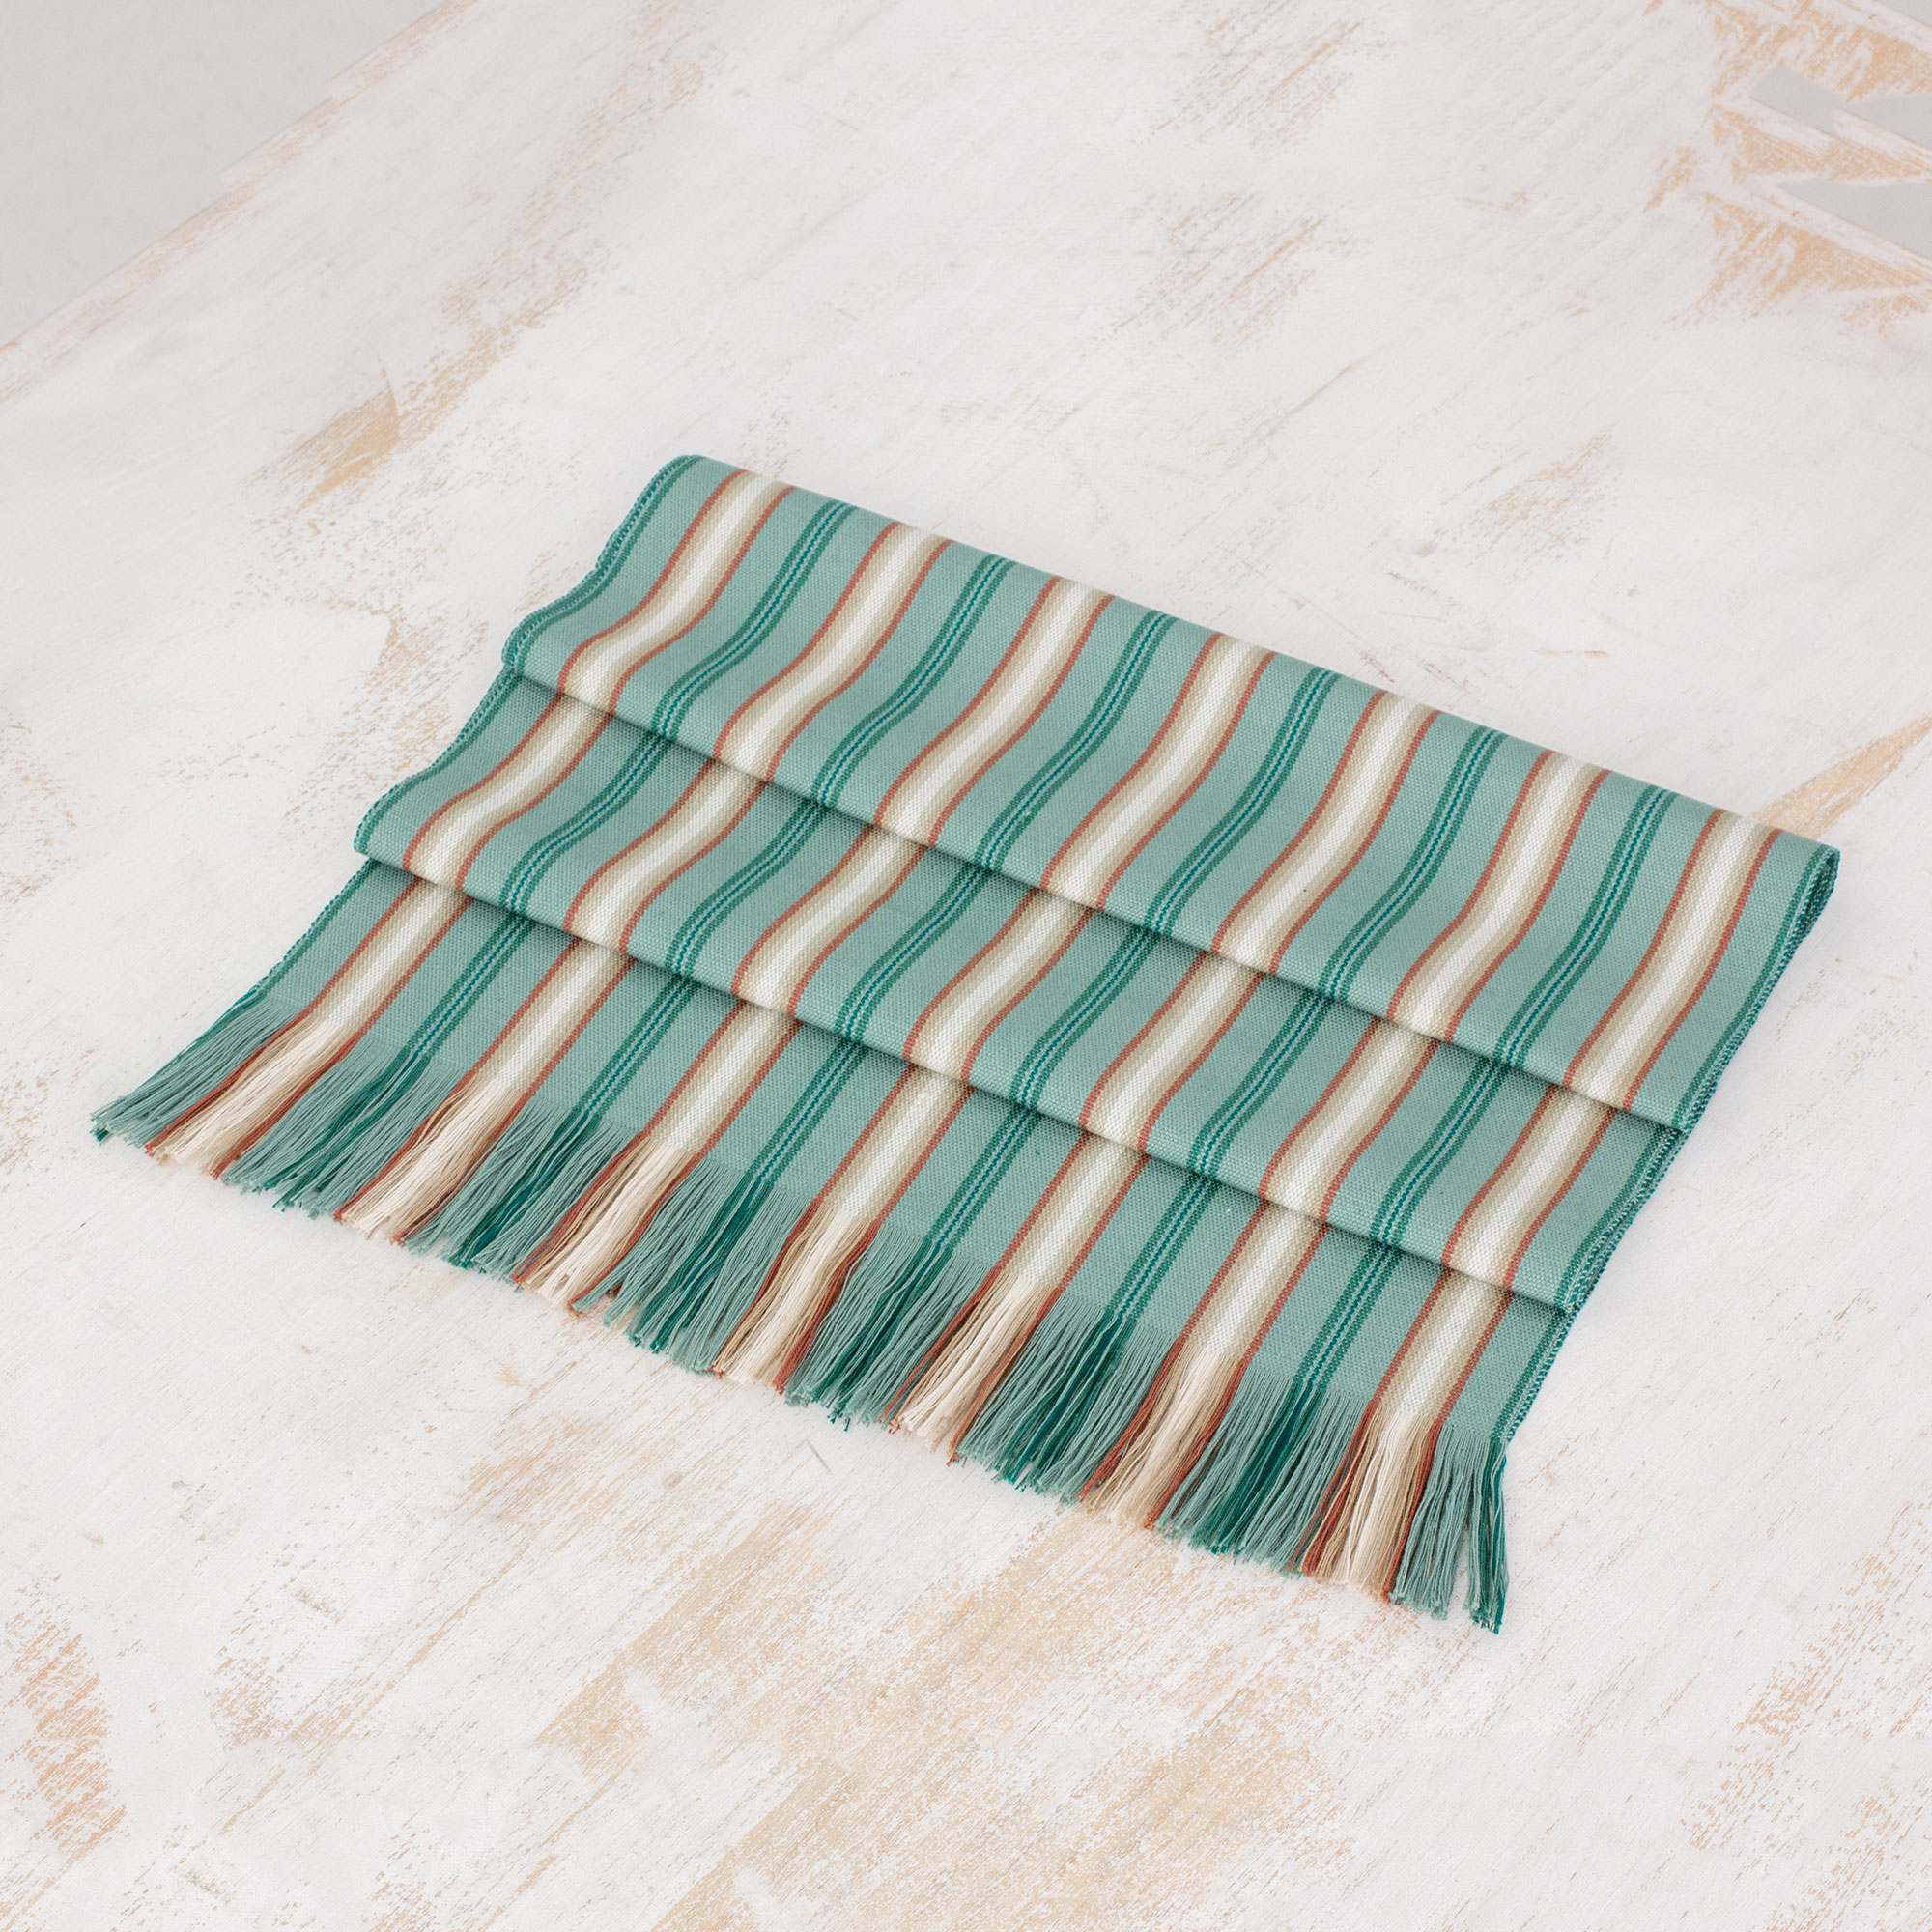 Two Handwoven Guatemalan White and Green Cotton Dish Towels, 'Forest Colors